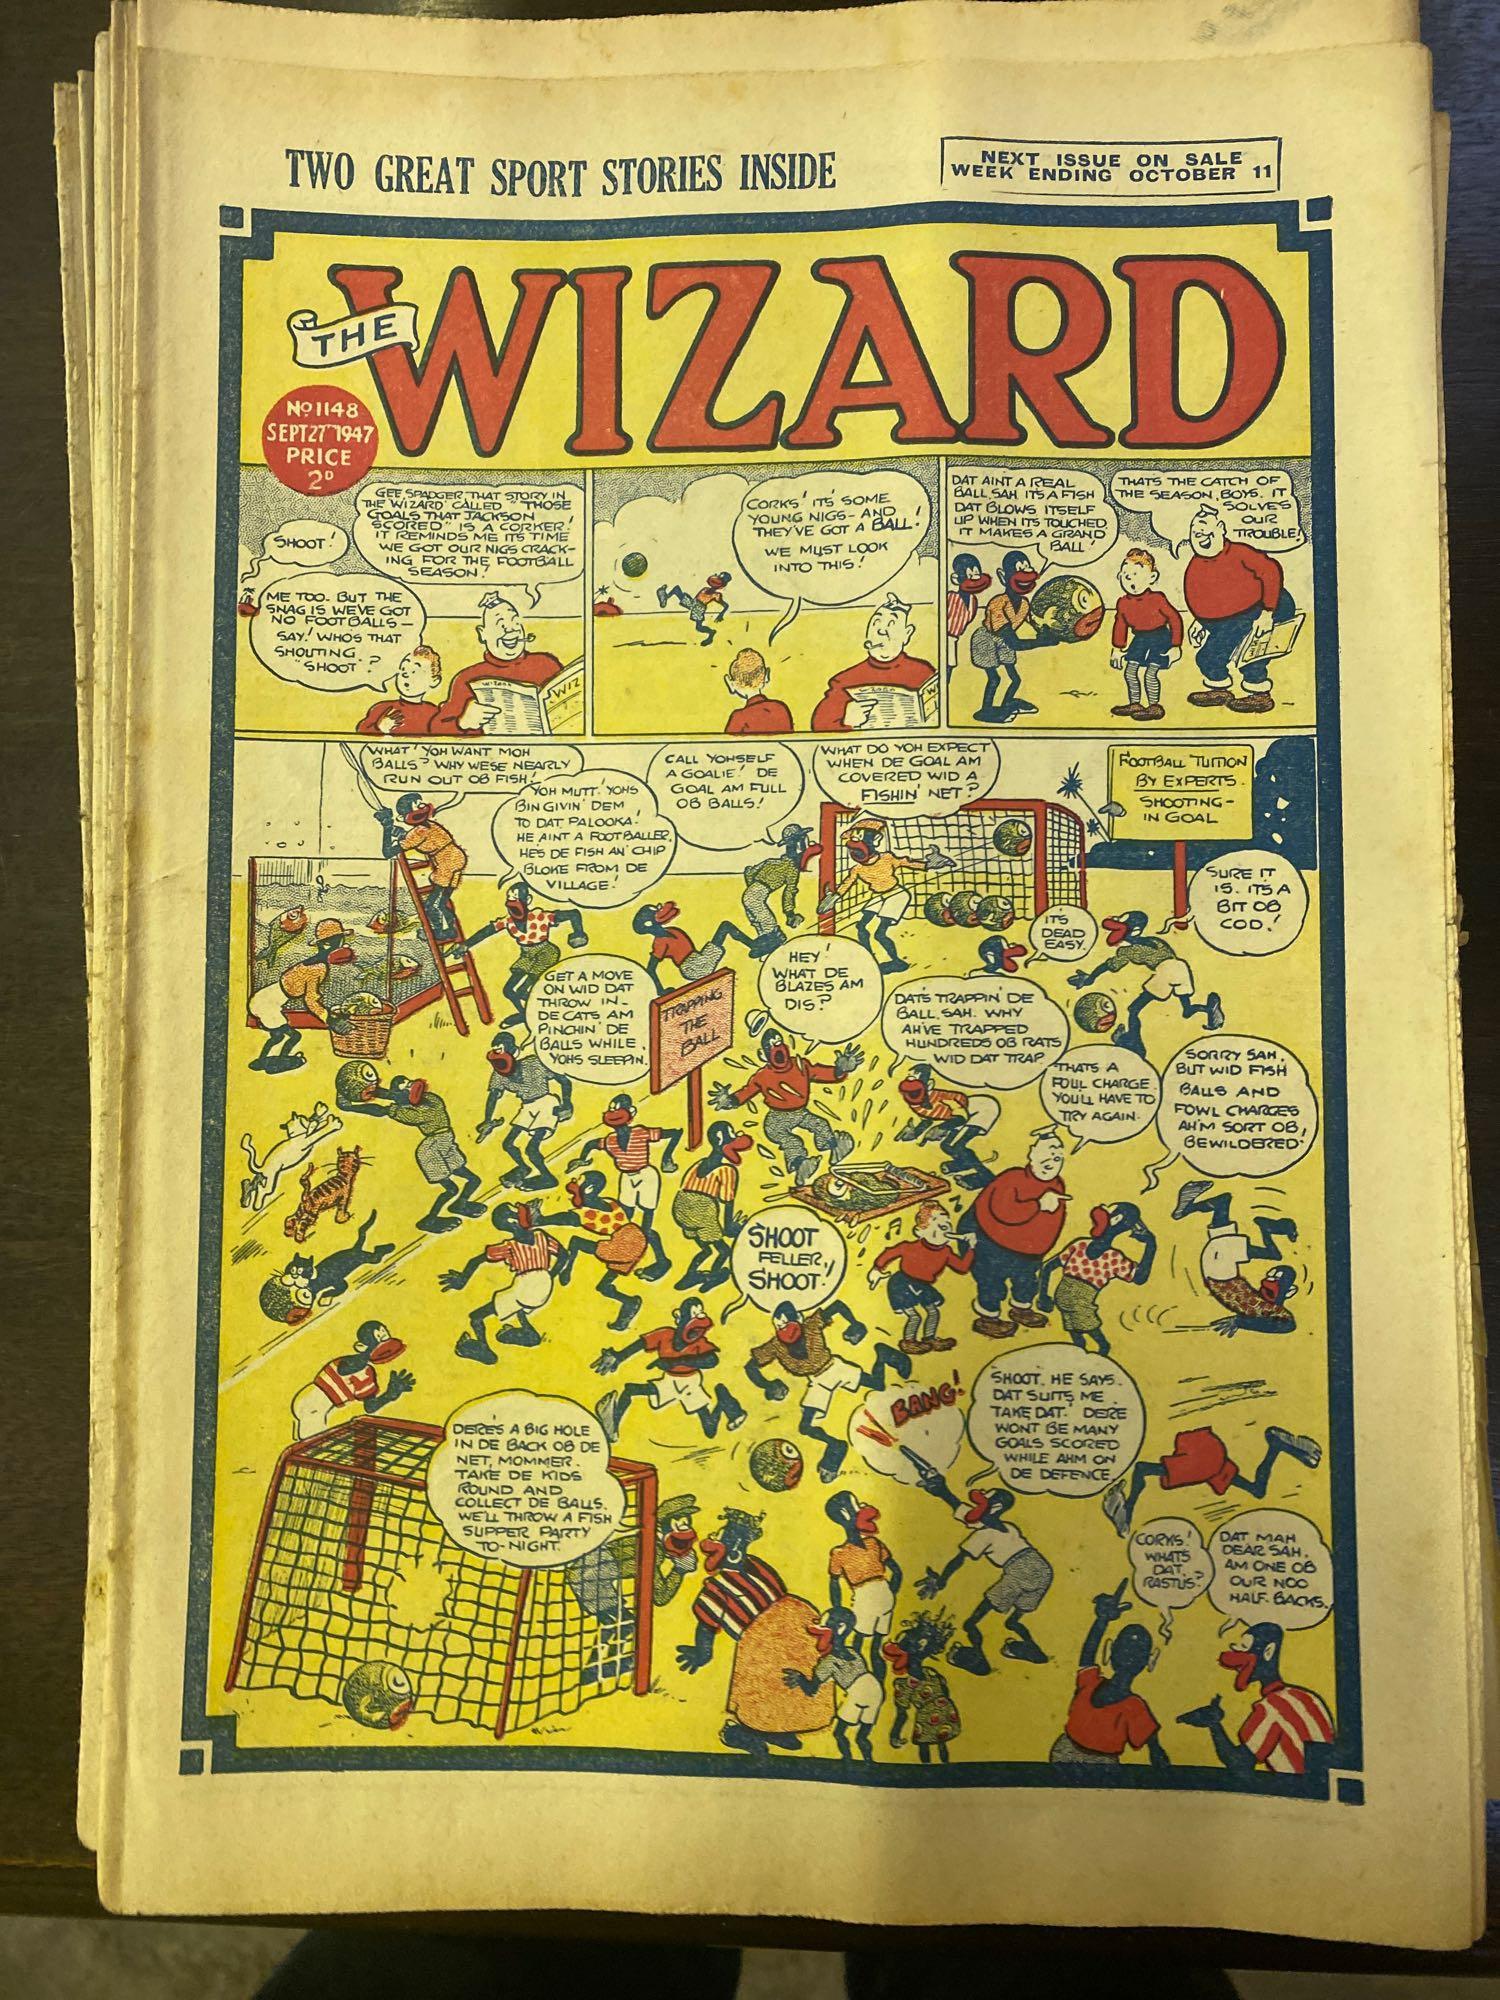 A quantity of vintage comics and childrens newspapers - Image 16 of 124